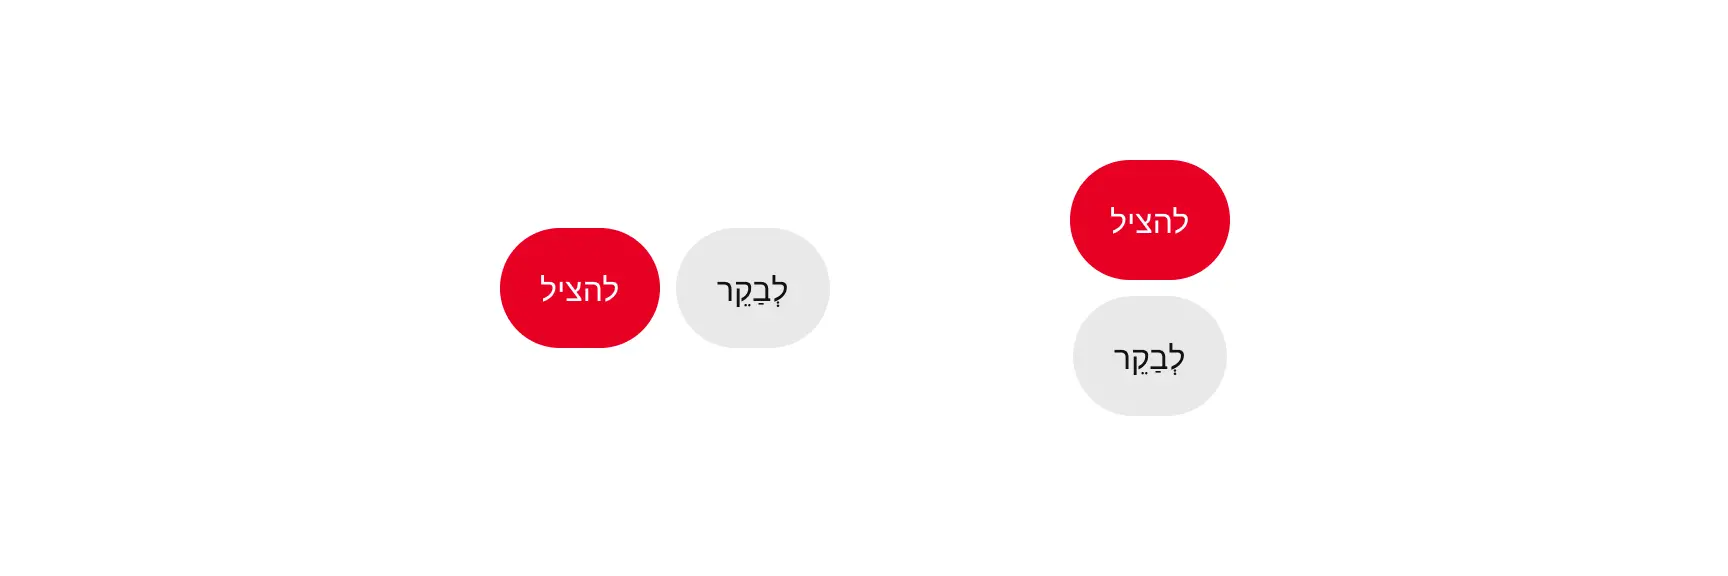 Two sets of buttons, one vertically stacked and one horizontal. The button layout is localized for right-to-left languages. 